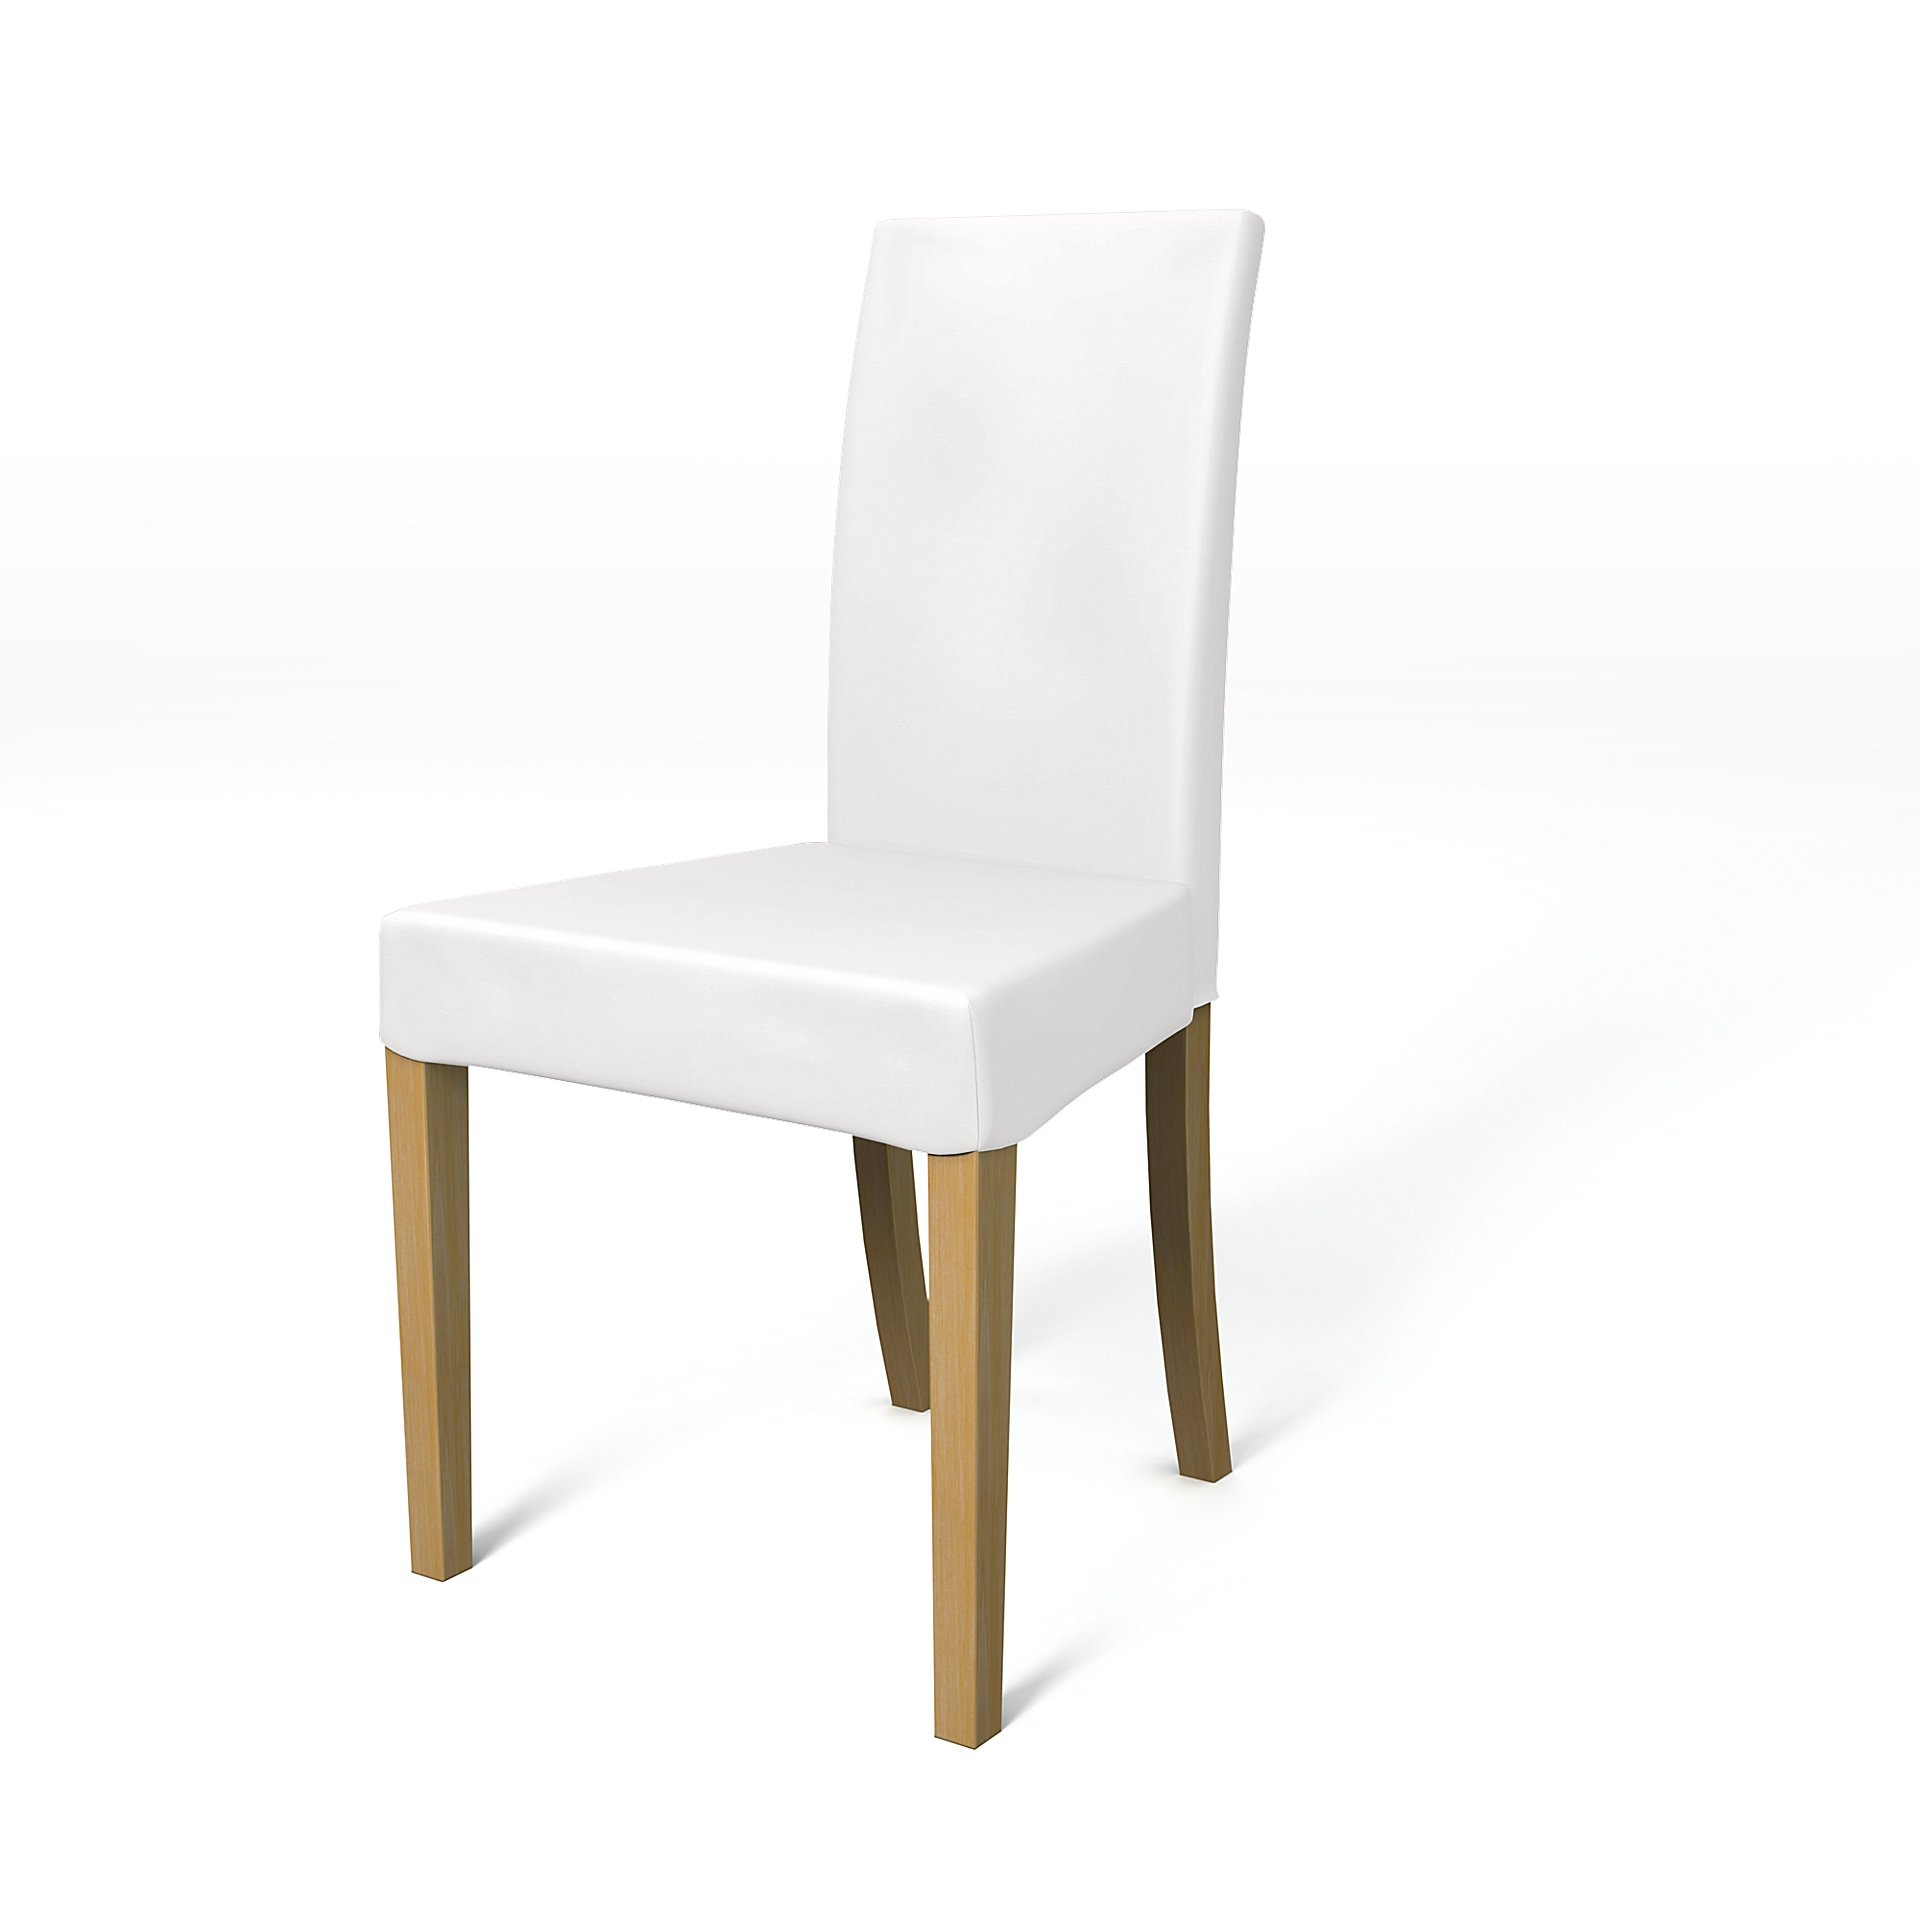 IKEA - Harry Dining Chair Cover, Absolute White, Cotton - Bemz